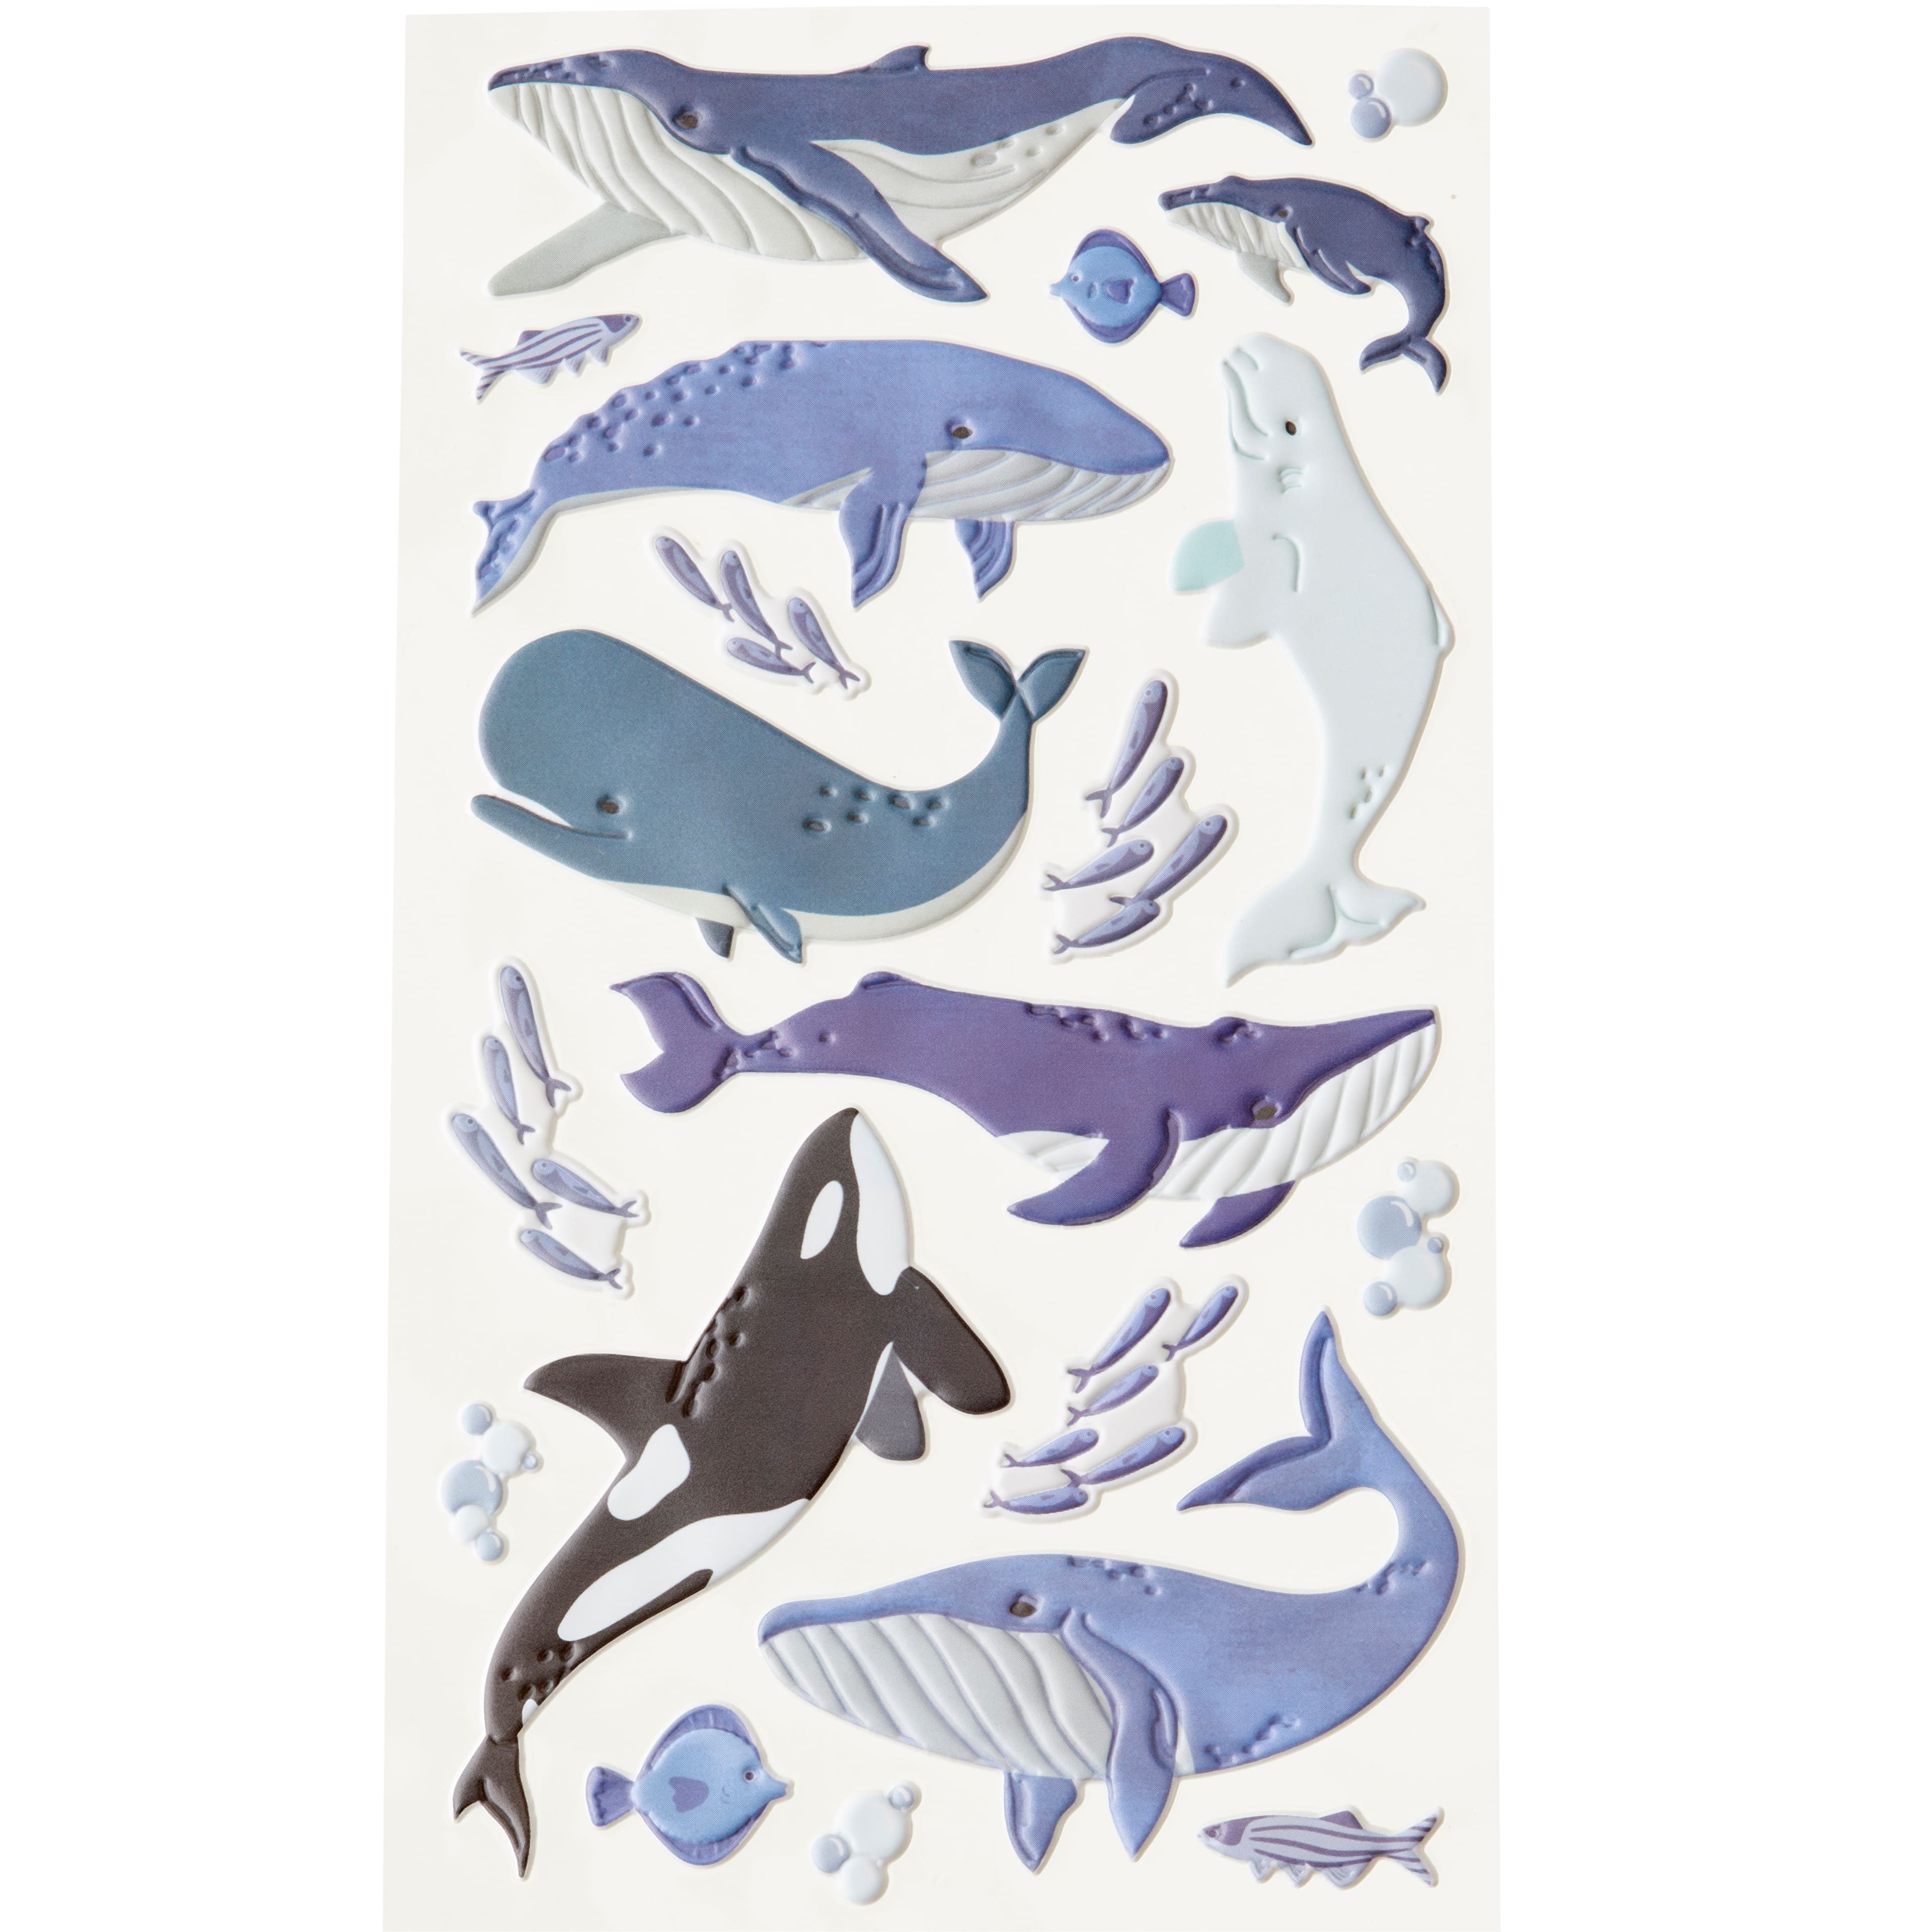 Buy in Bulk - 12 Pack: Fishing Stickers by Recollections™